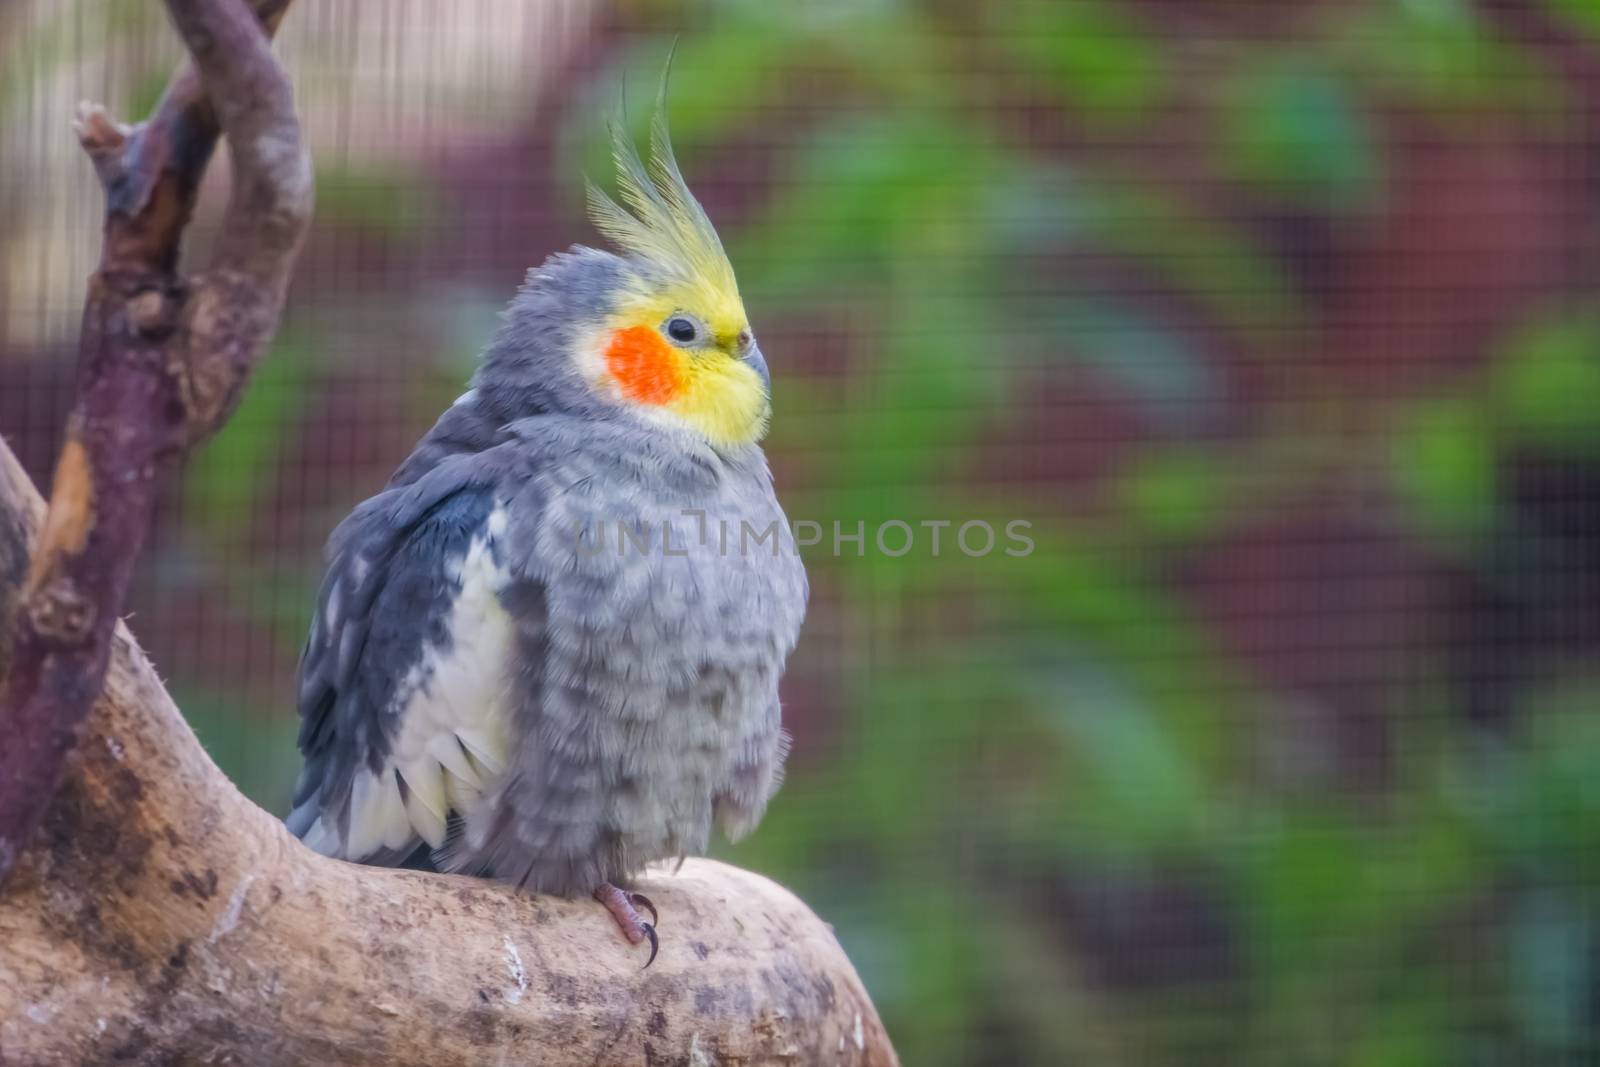 Closeup portrait of a cockatiel sitting on a branch, tropical bird specie from Australia